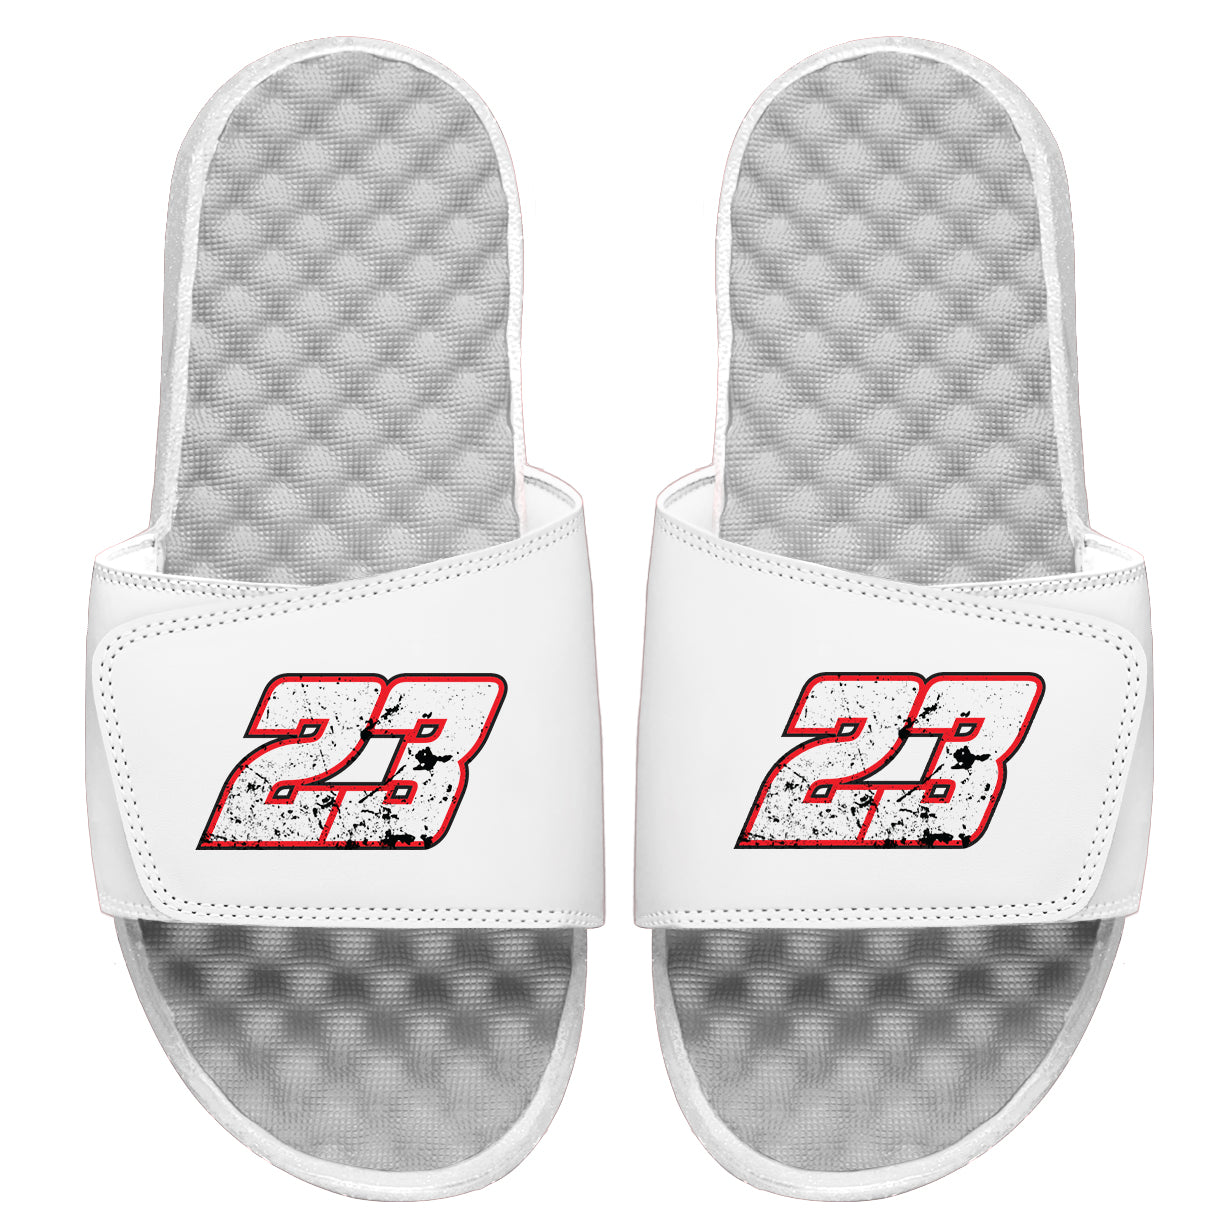 Bubba Wallace 23 Distressed Slides